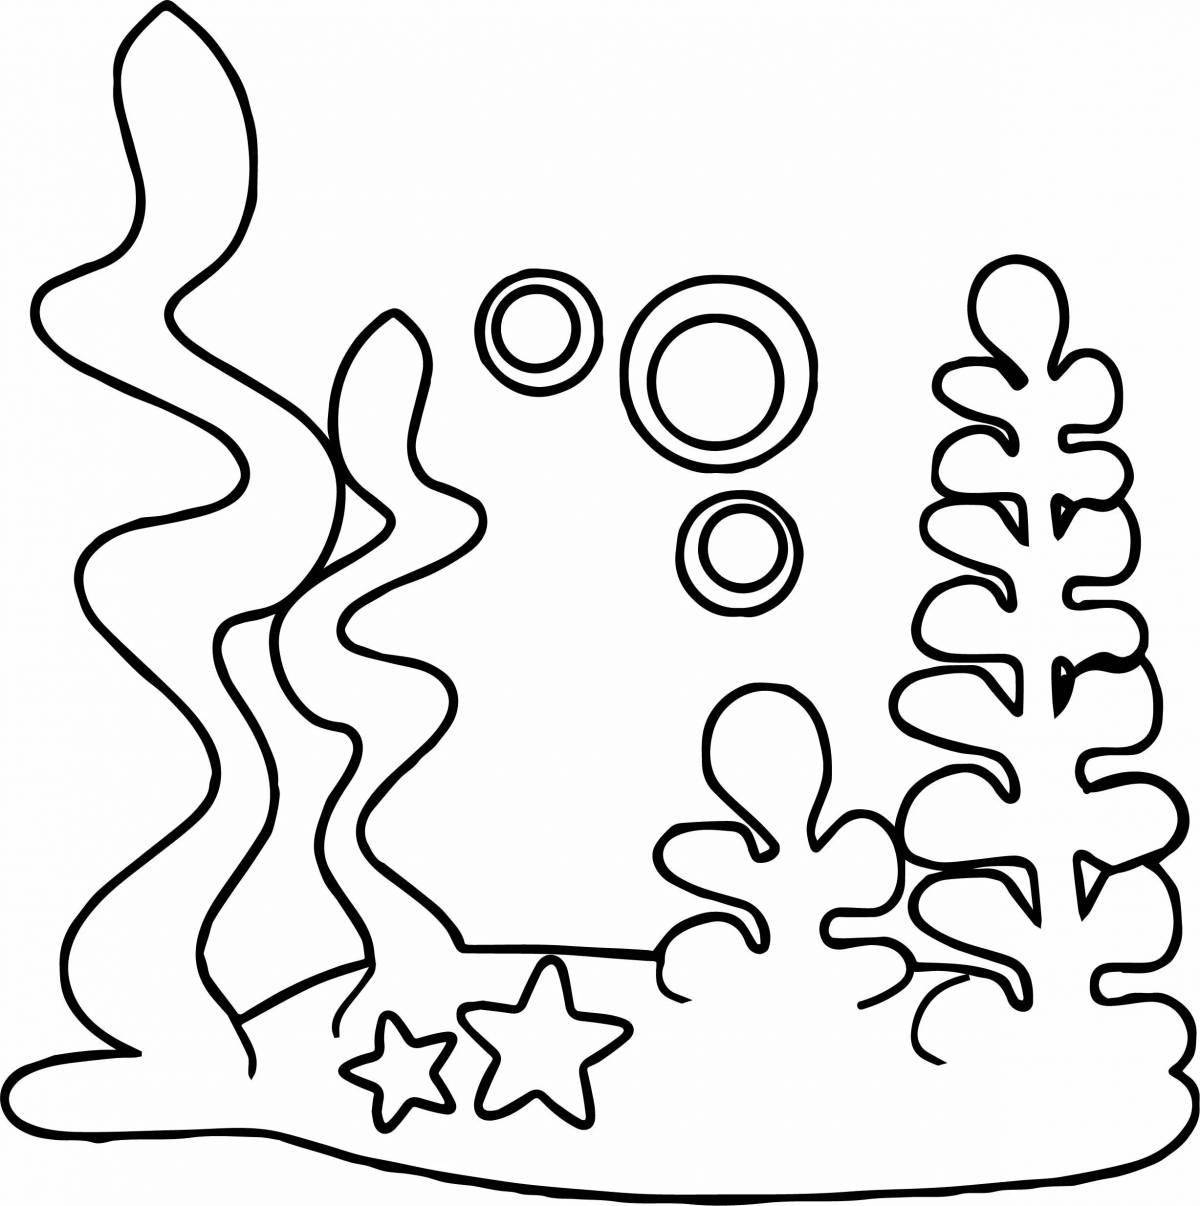 Innovative seaweed coloring page for kids